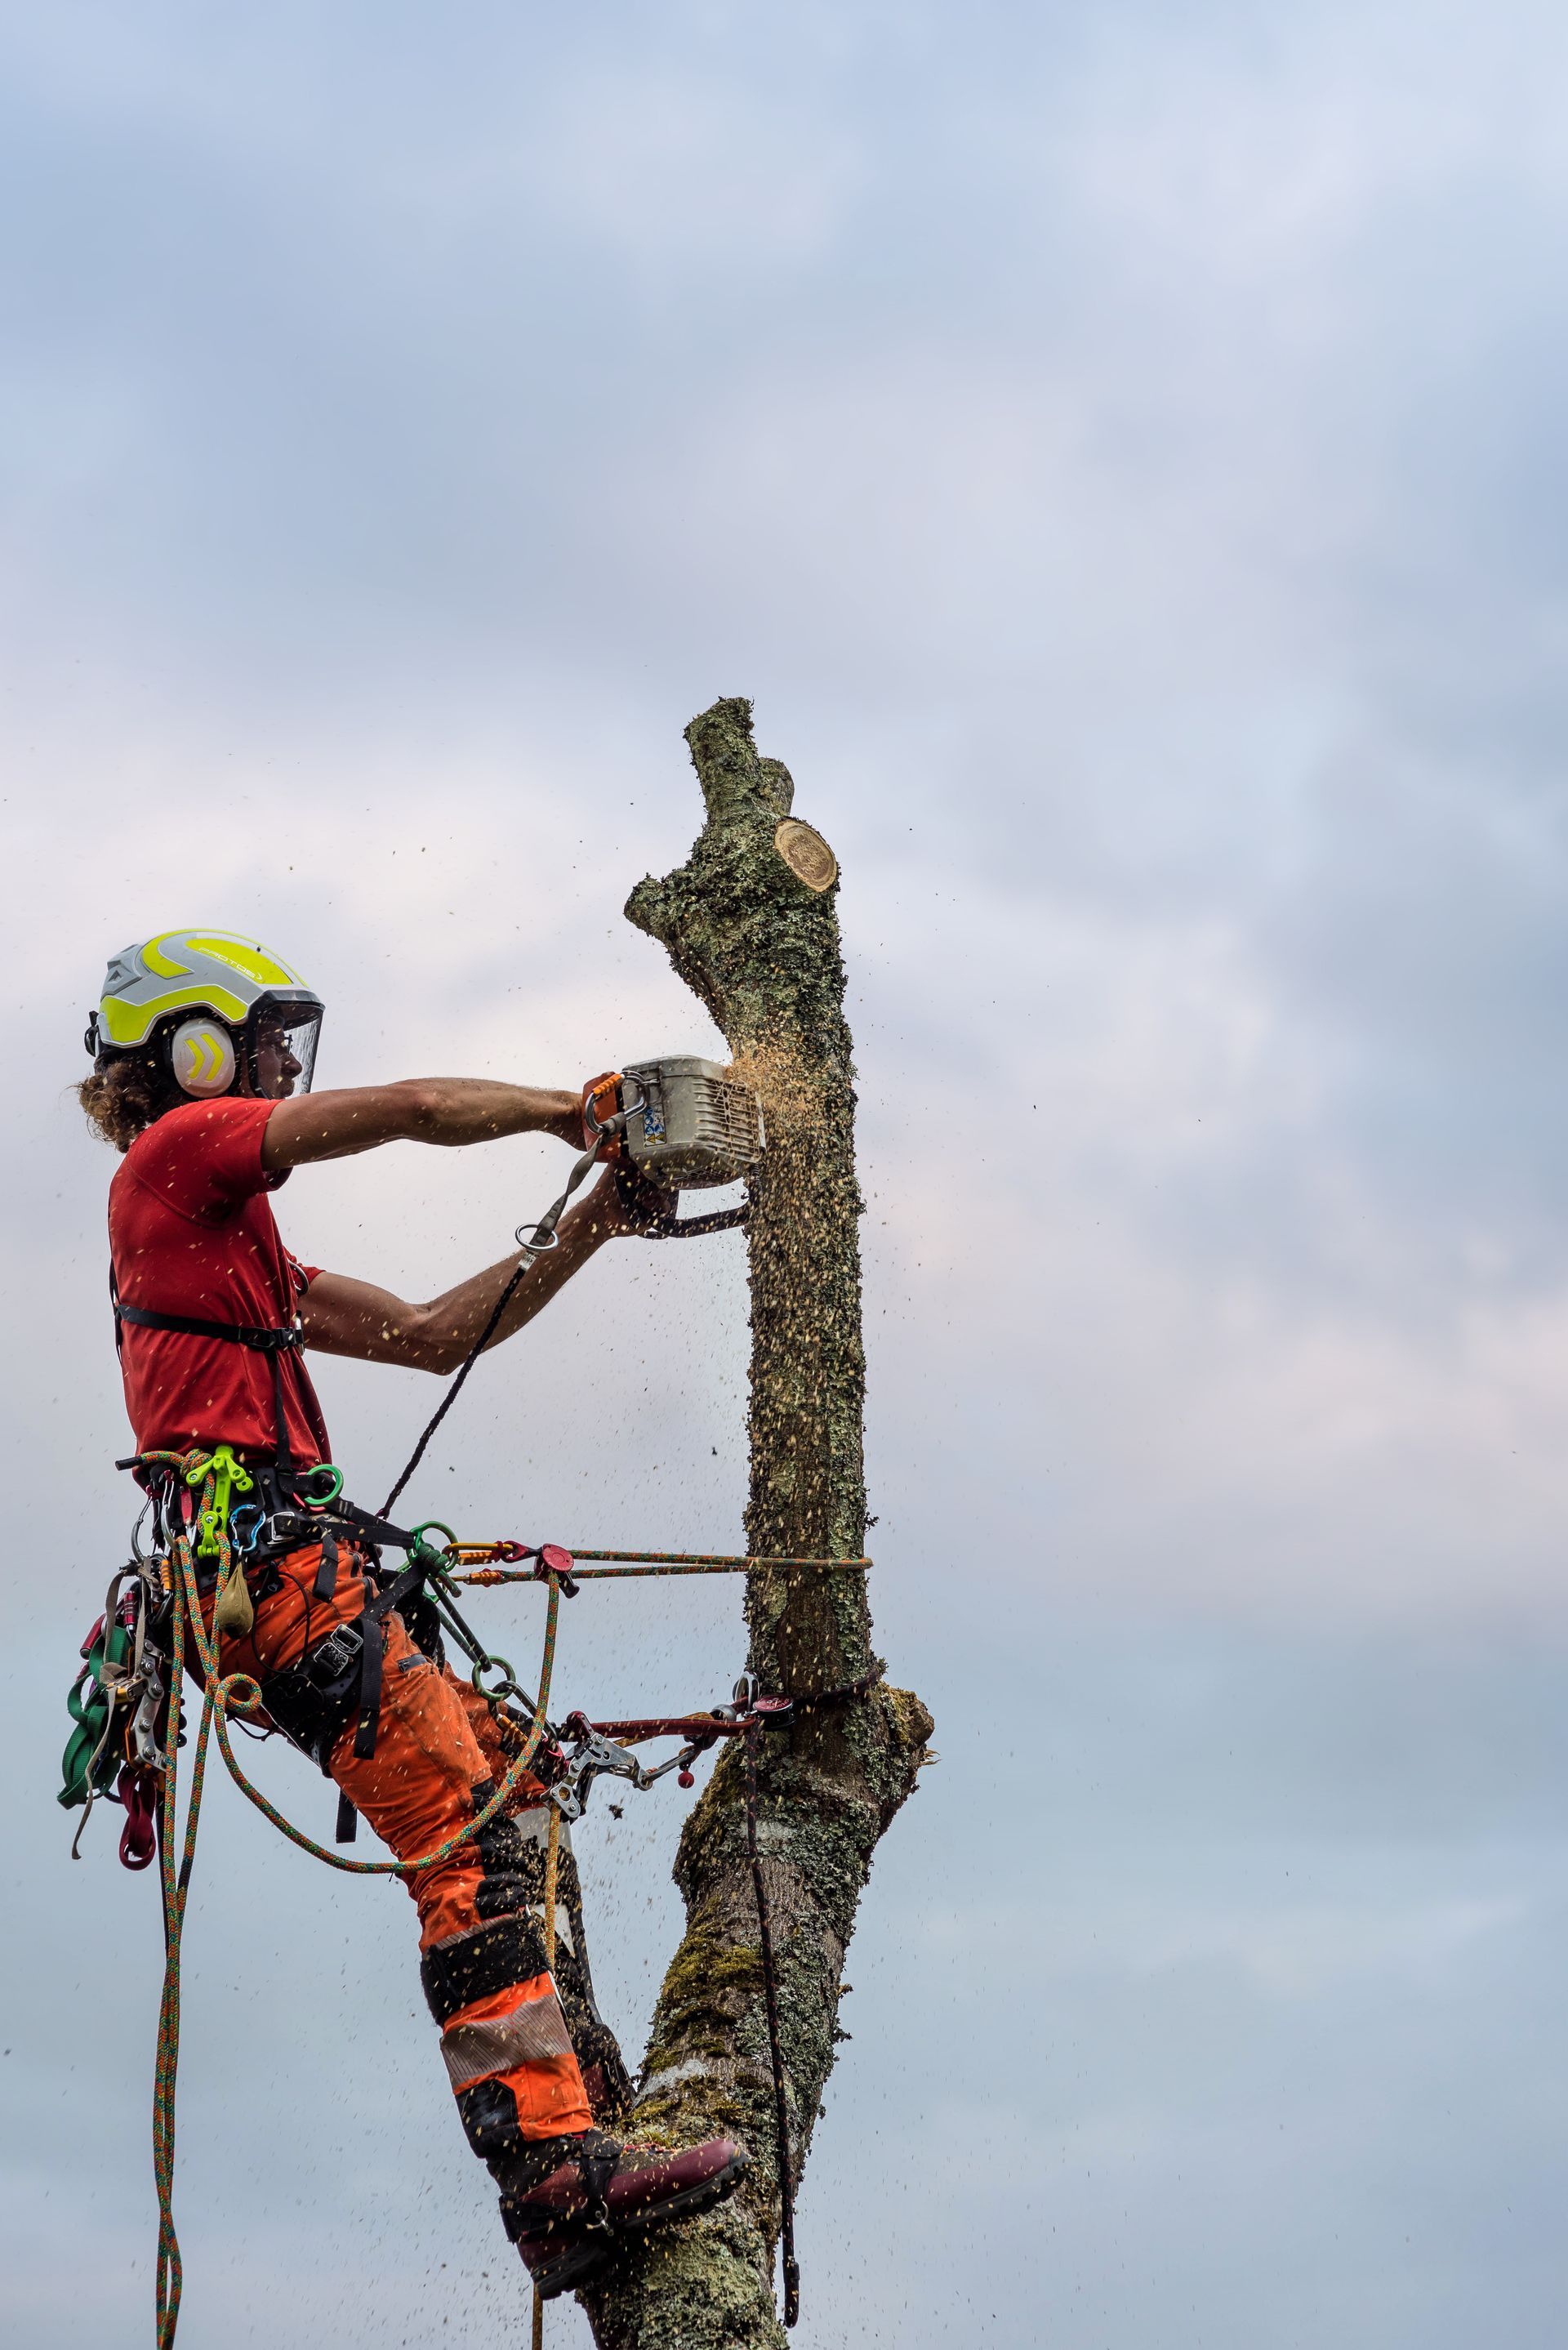 Pruner in action in a tree